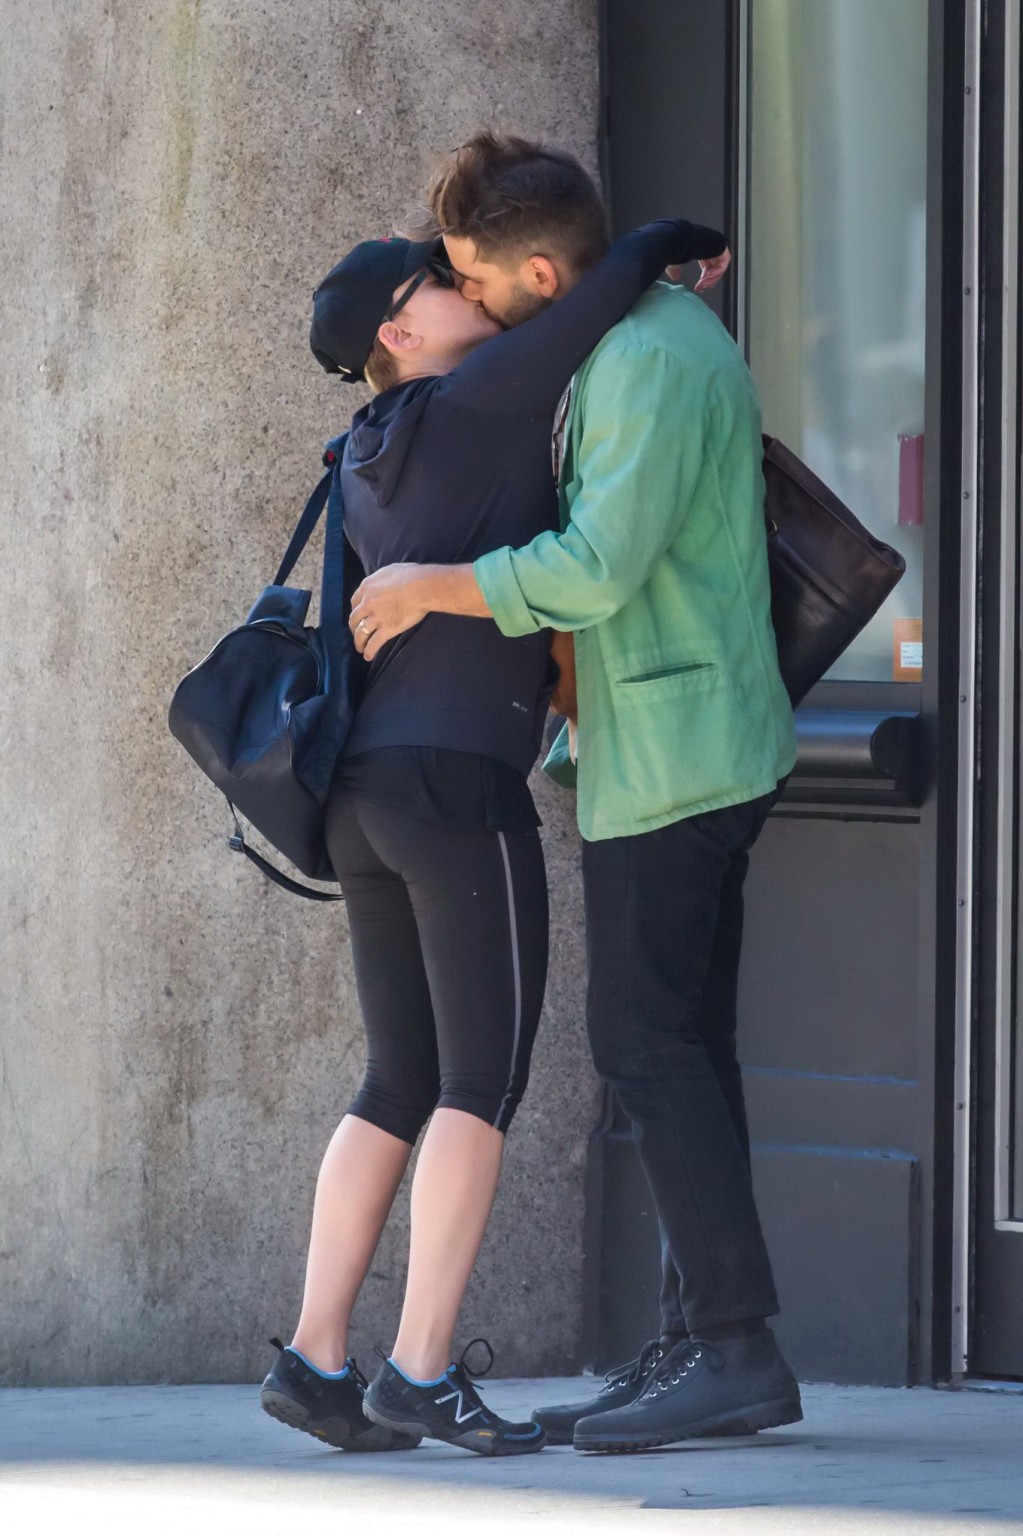 Scarlett Johansson in black leggings getting ass groped while make out in NYC #75184005